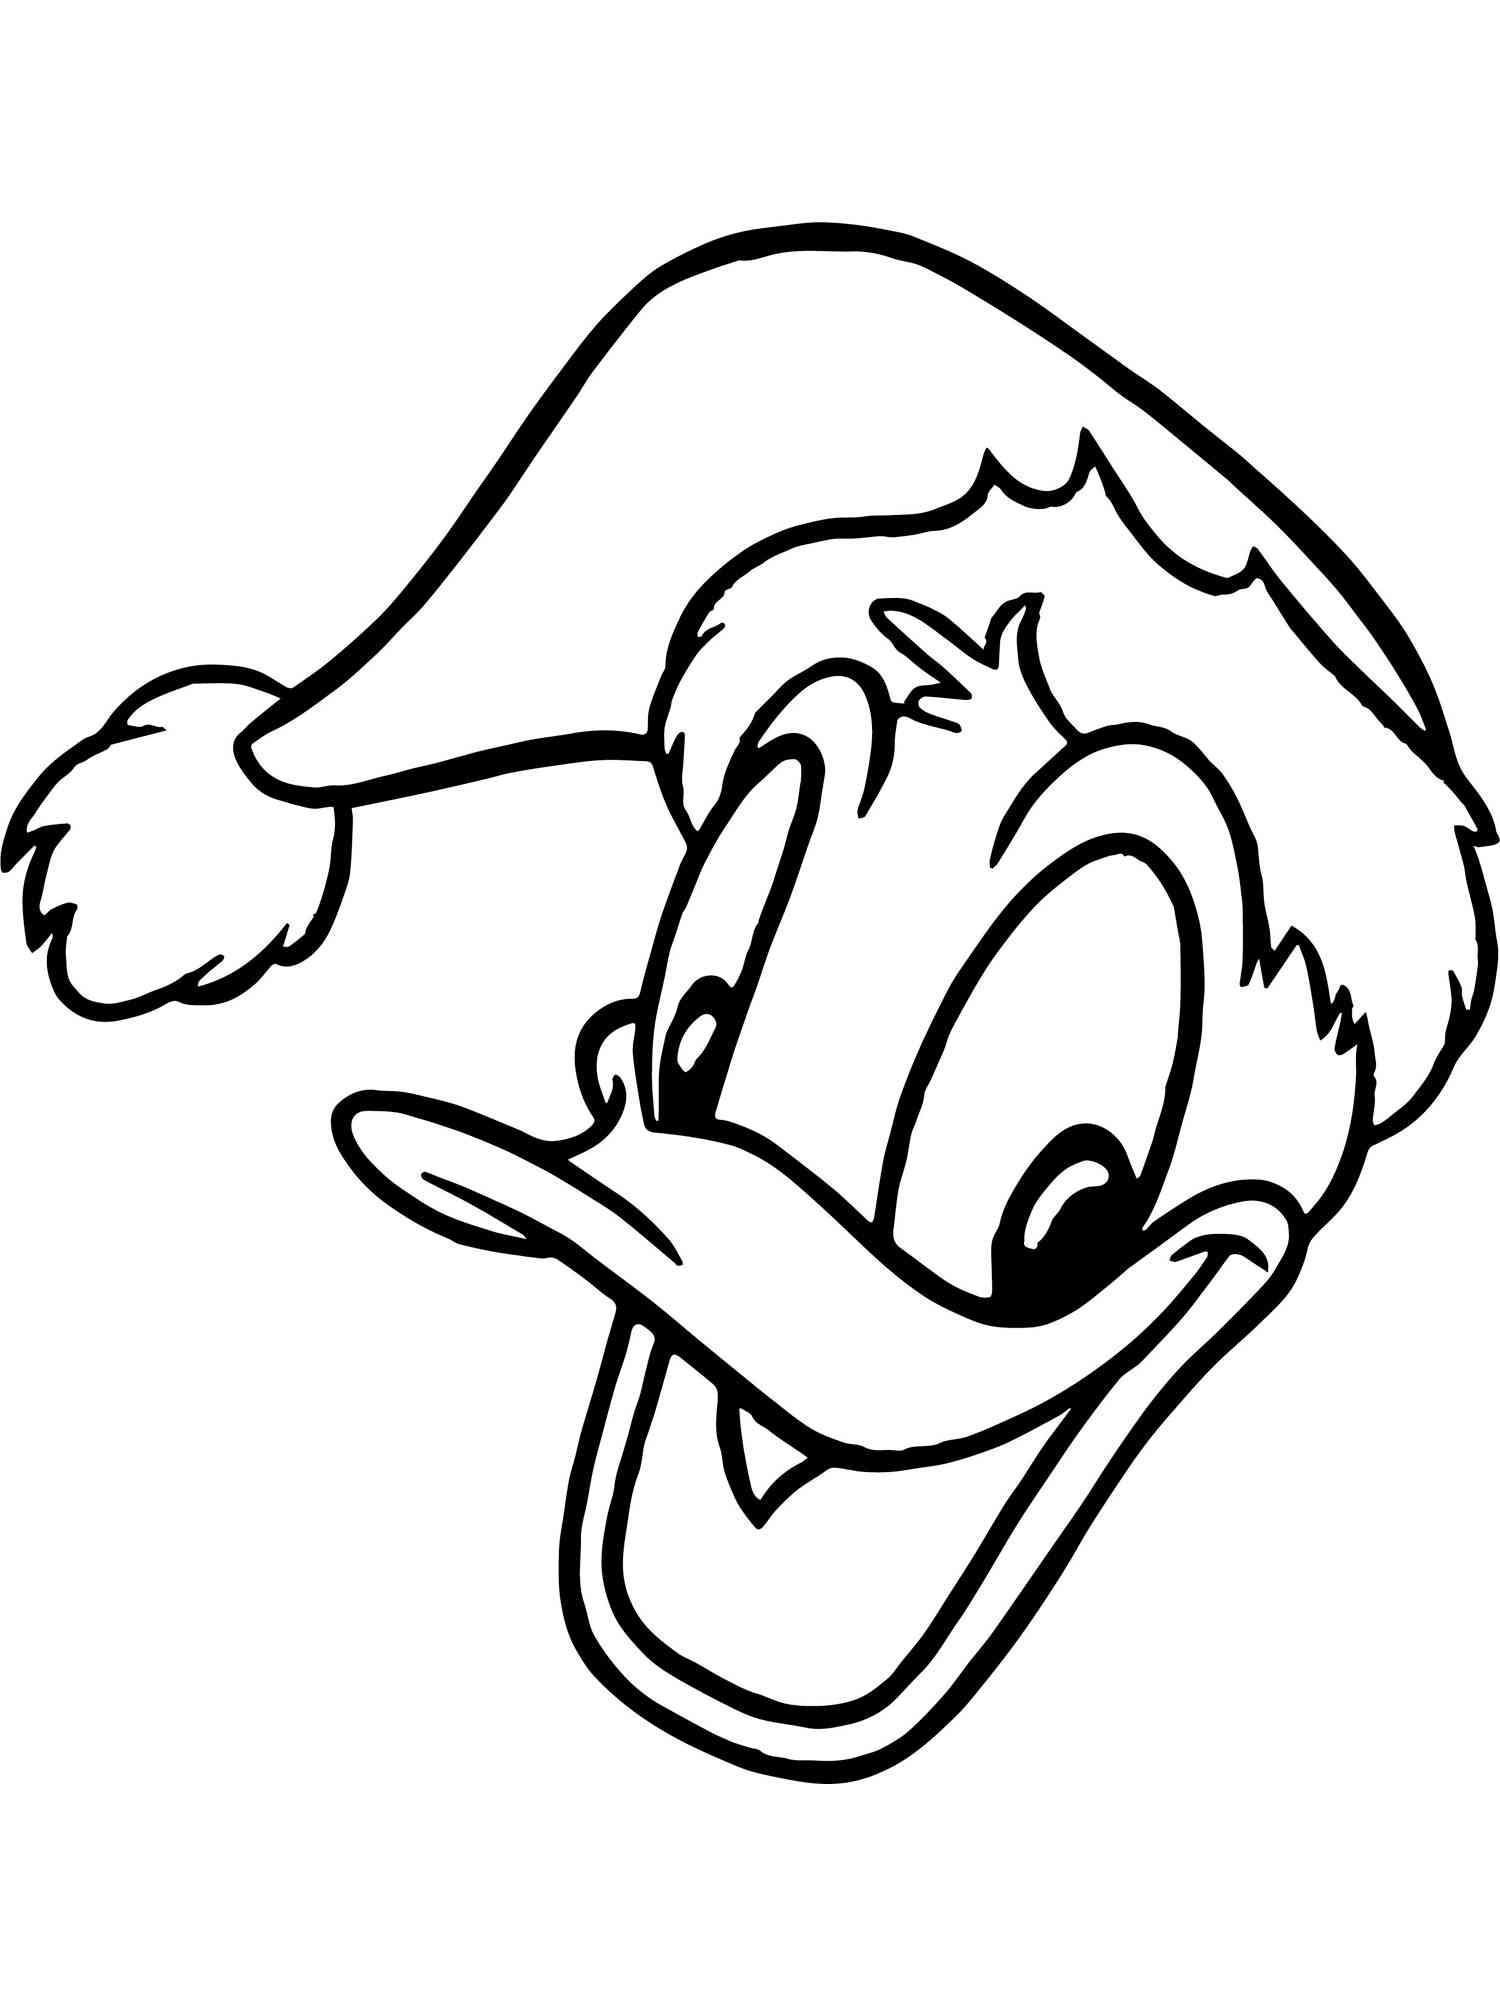 Donald Duck 11 coloring page